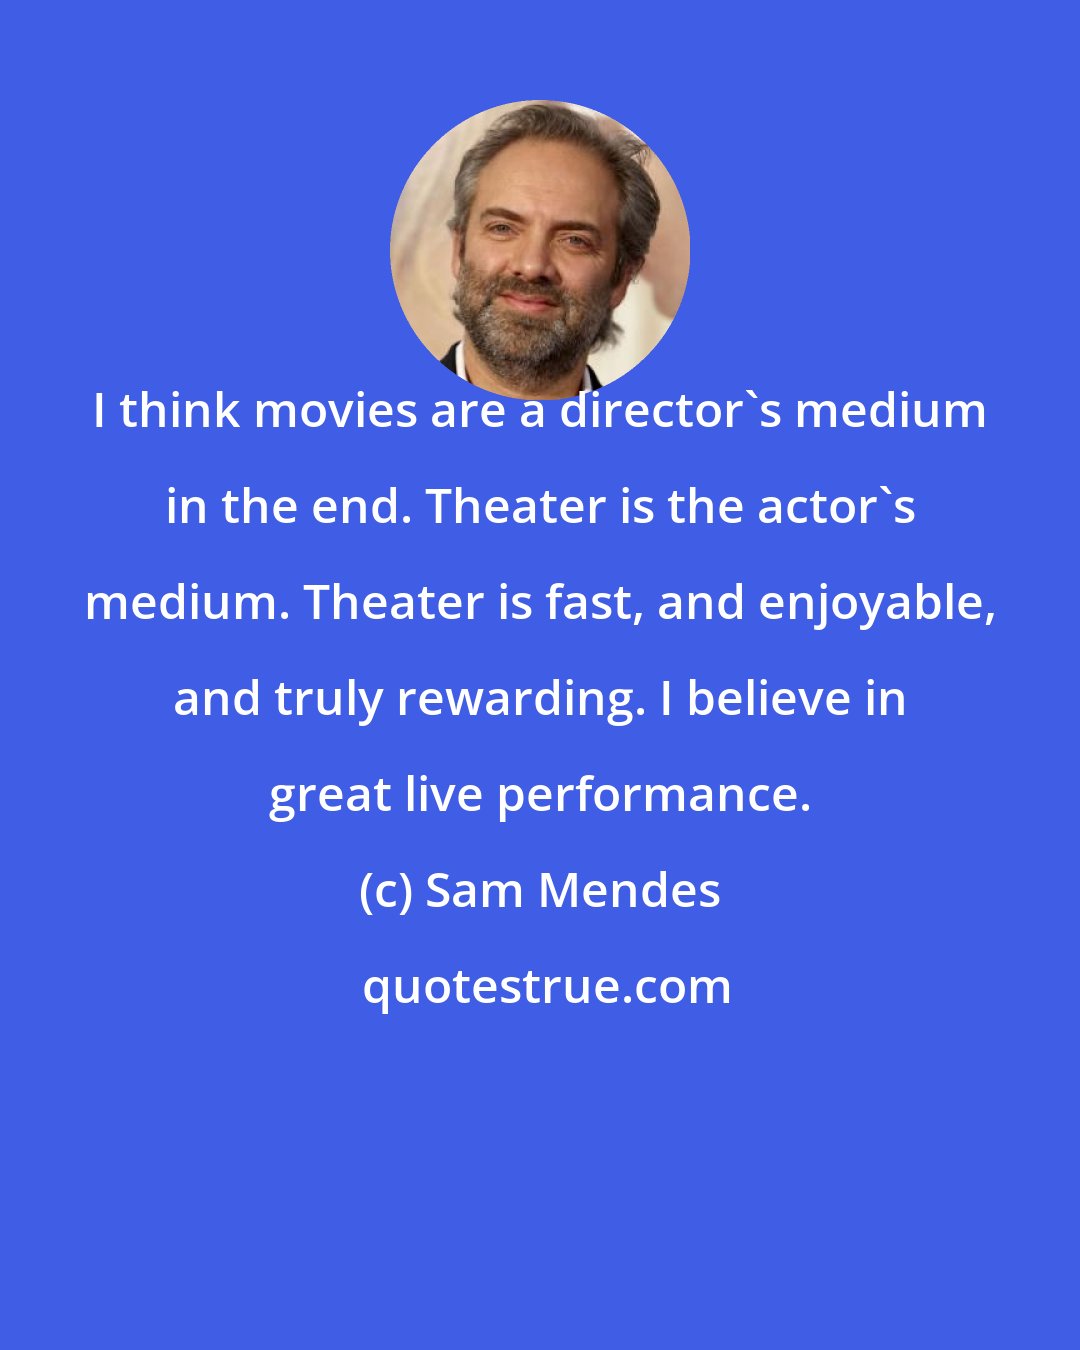 Sam Mendes: I think movies are a director's medium in the end. Theater is the actor's medium. Theater is fast, and enjoyable, and truly rewarding. I believe in great live performance.